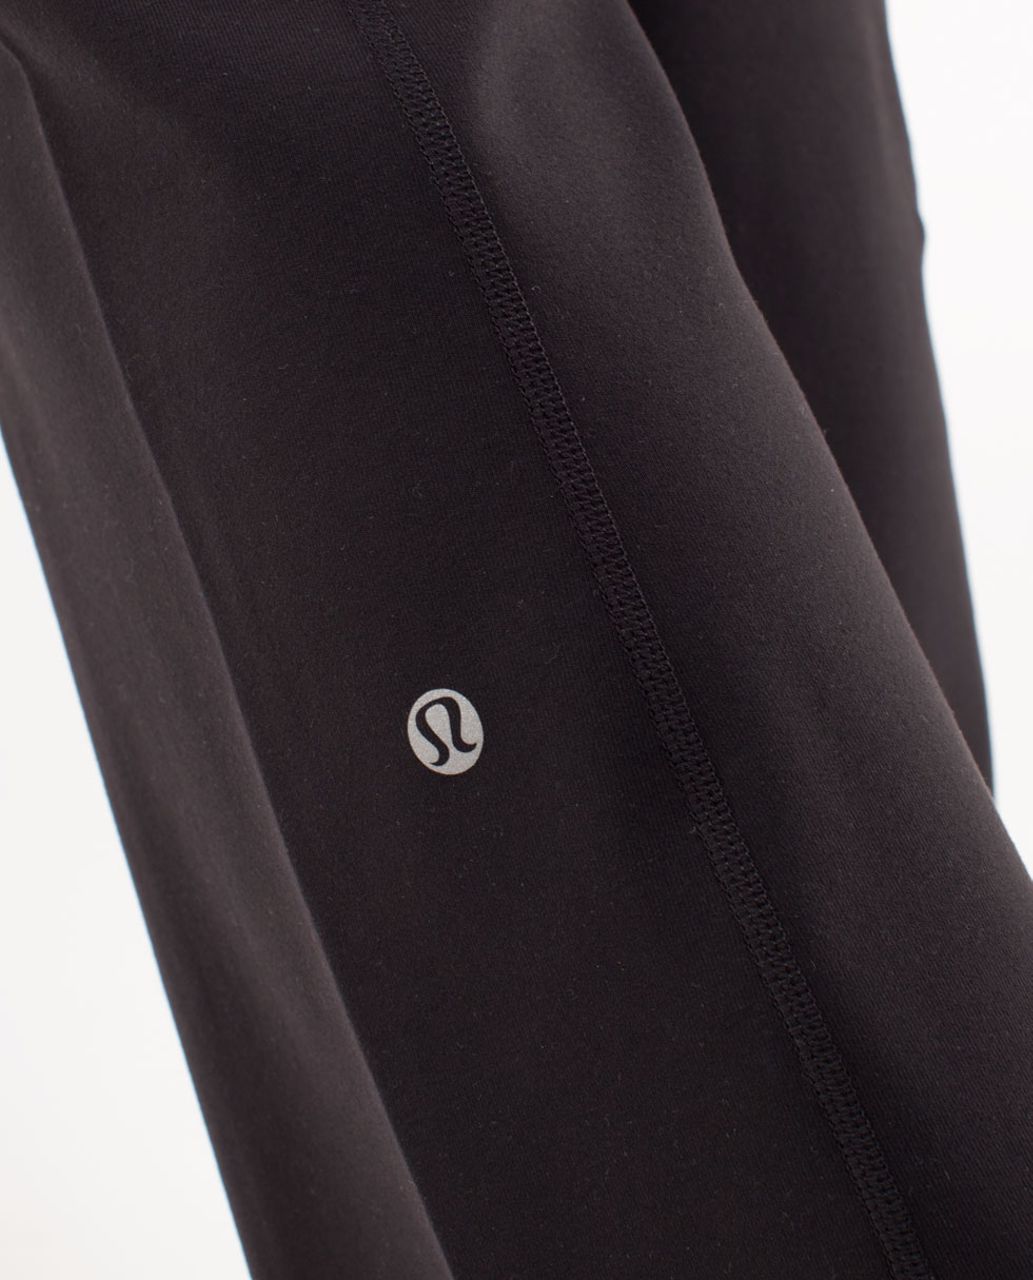 Lululemon Groove Pant (Tall) - Black /  Heathered Fossil /  Quilting Spring 16